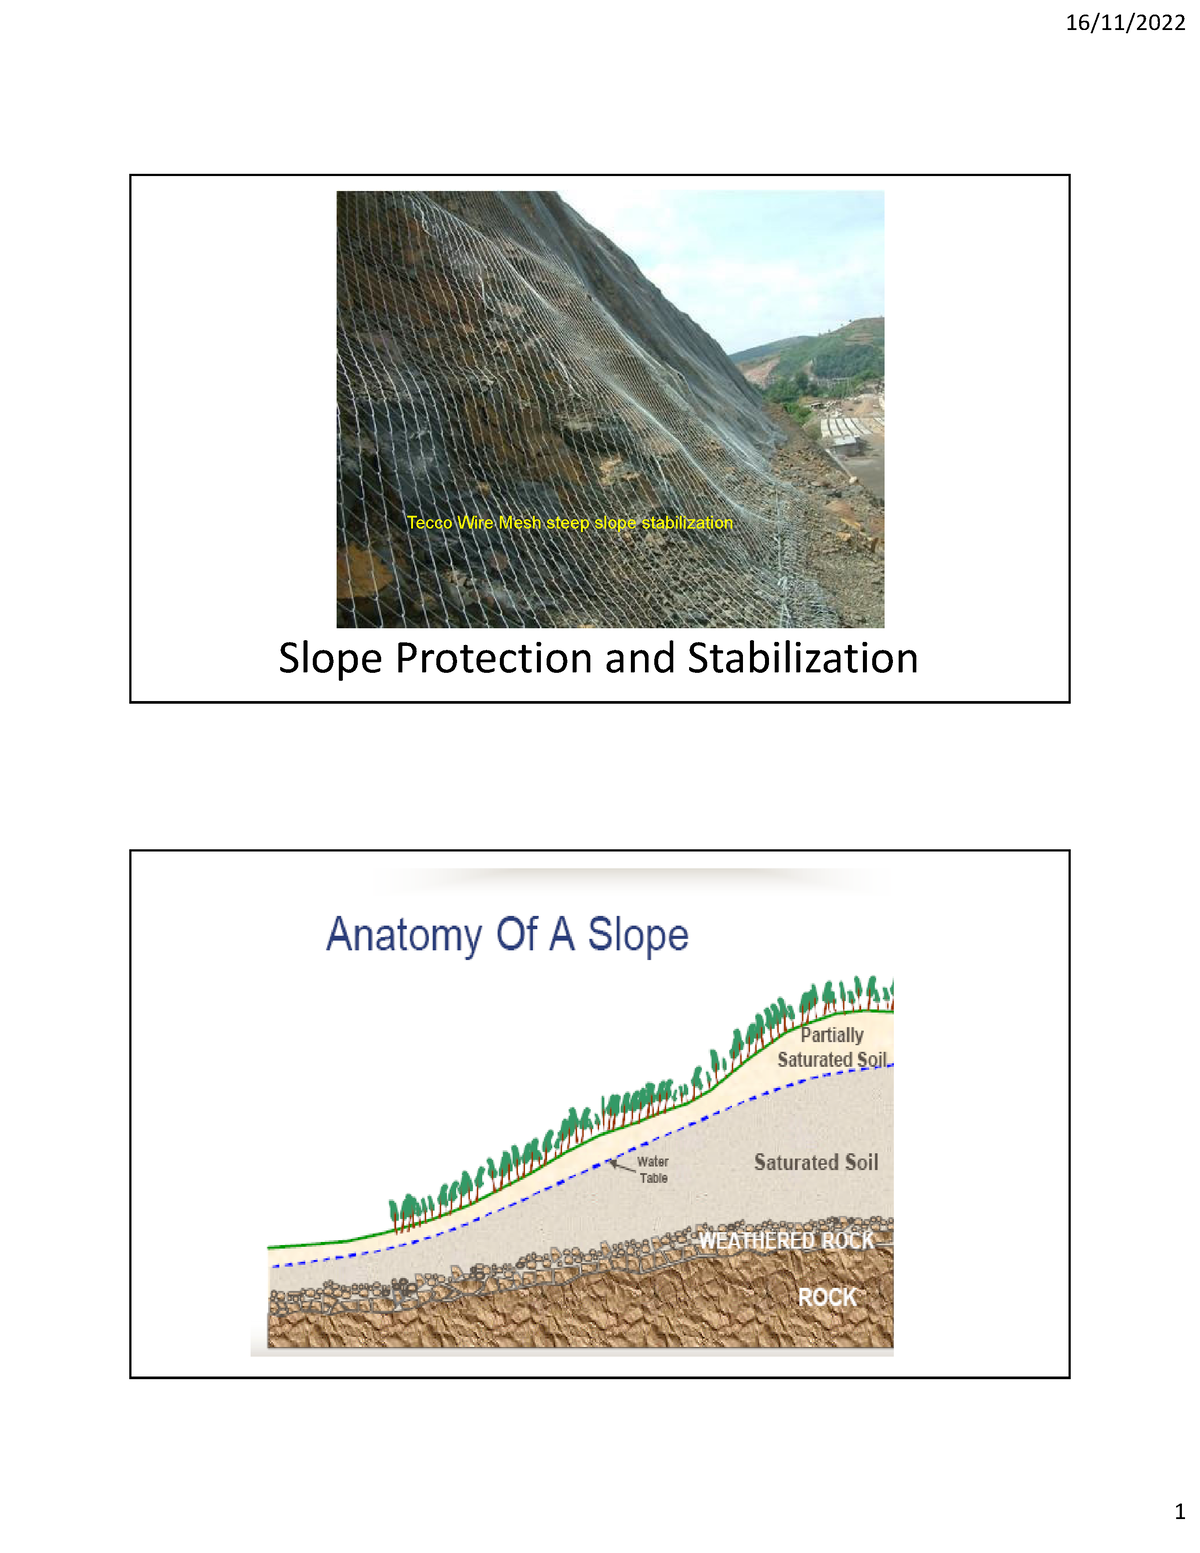 LECT 5 -SLOP Protection & Stabilization - Slope Protection and ...